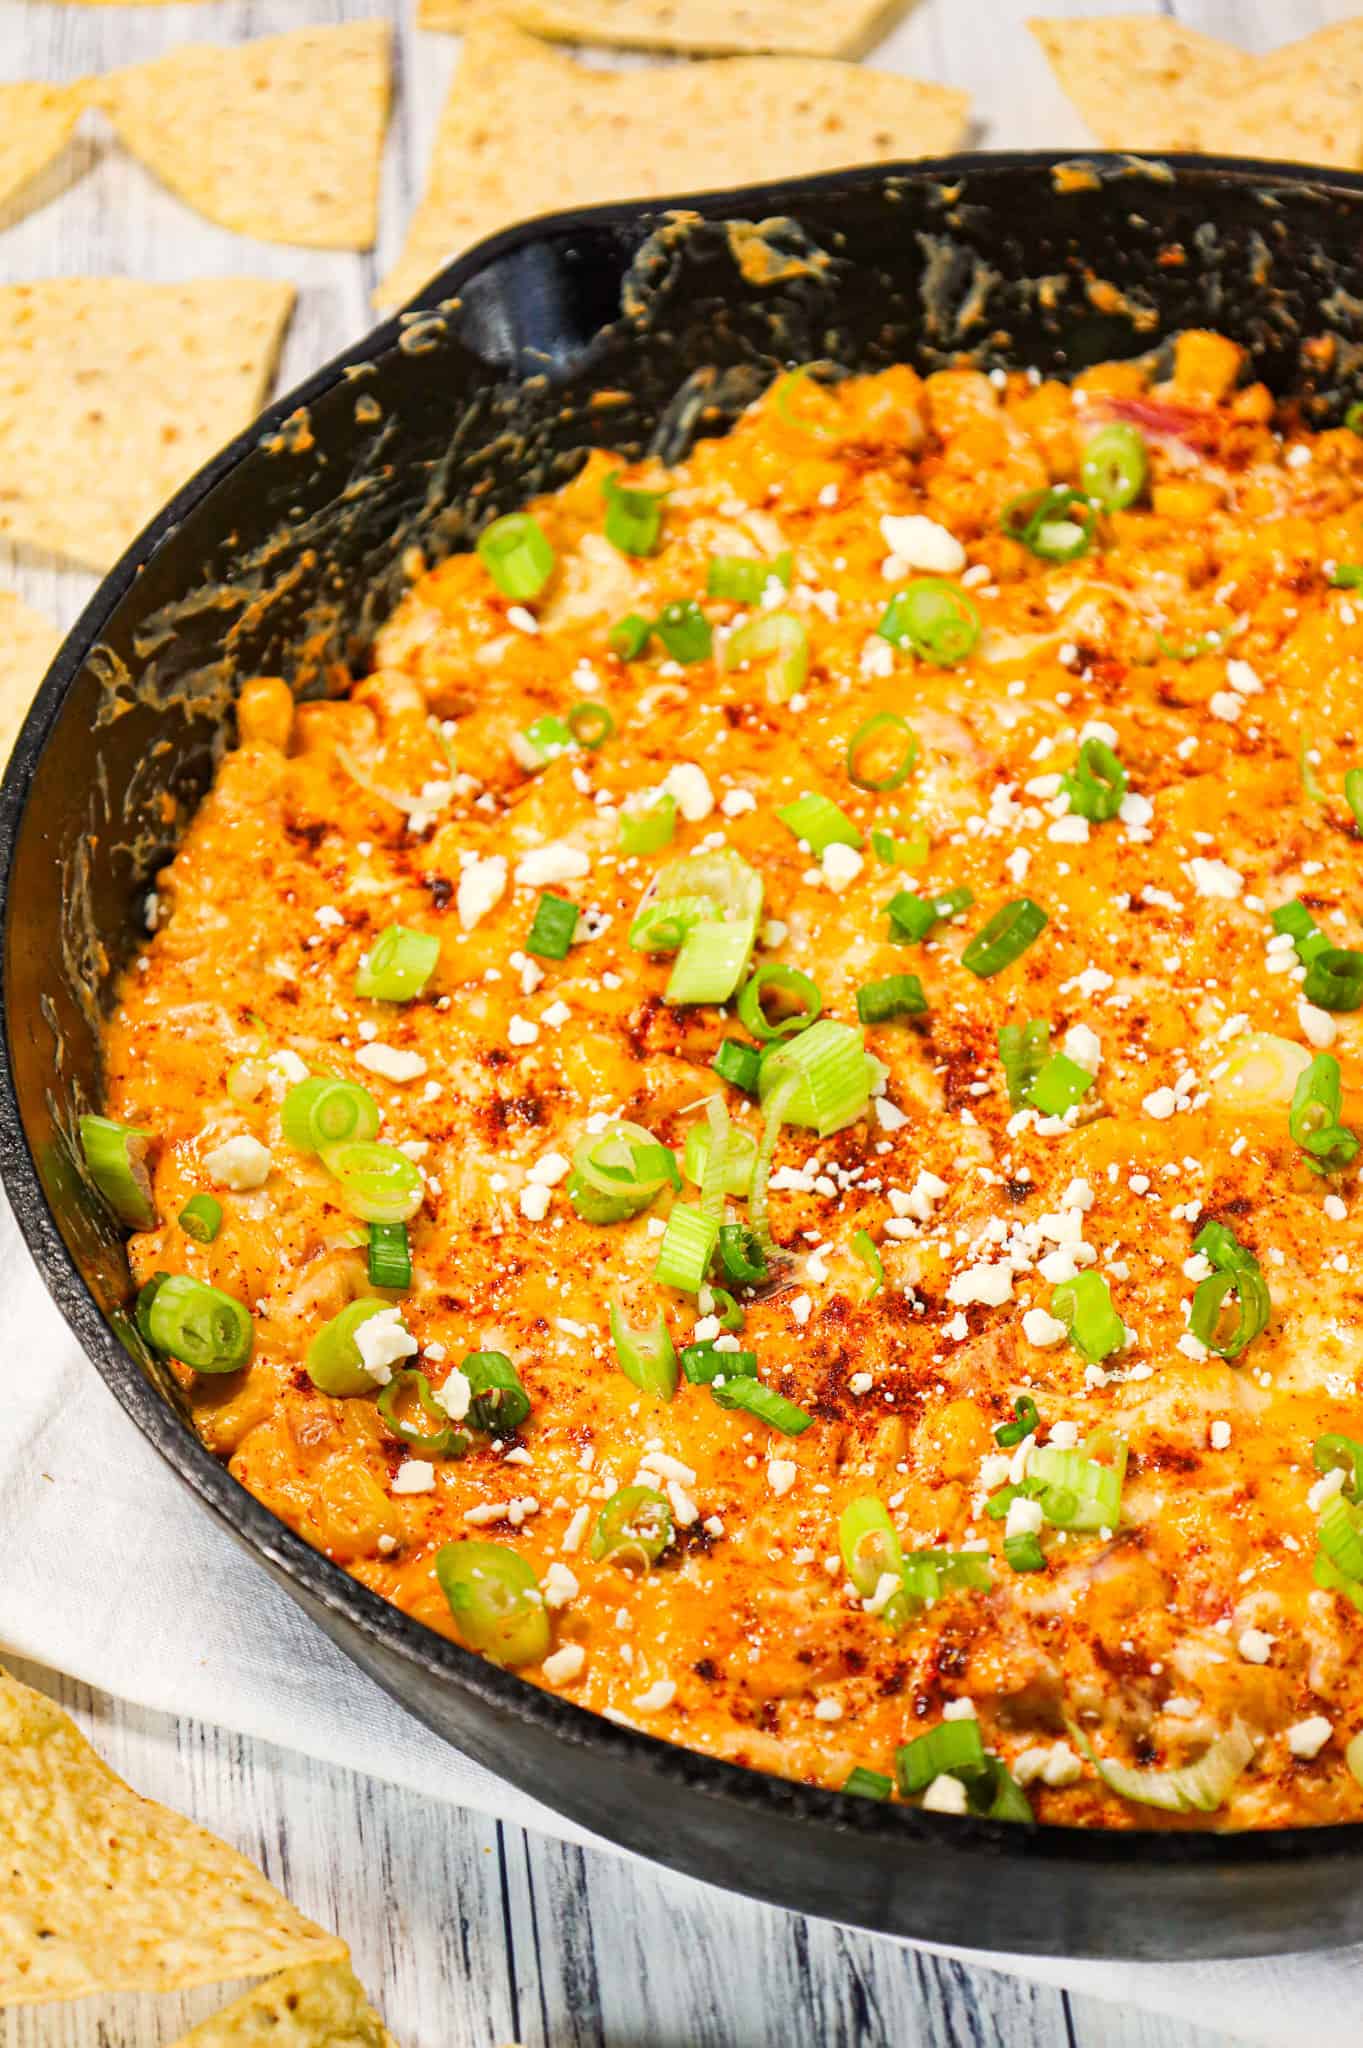 Mexican Street Corn Dip is a tasty hot party dip recipe loaded with corn, cream cheese, sour cream, chili powder, crumbled feta, red onions and shredded cheese.